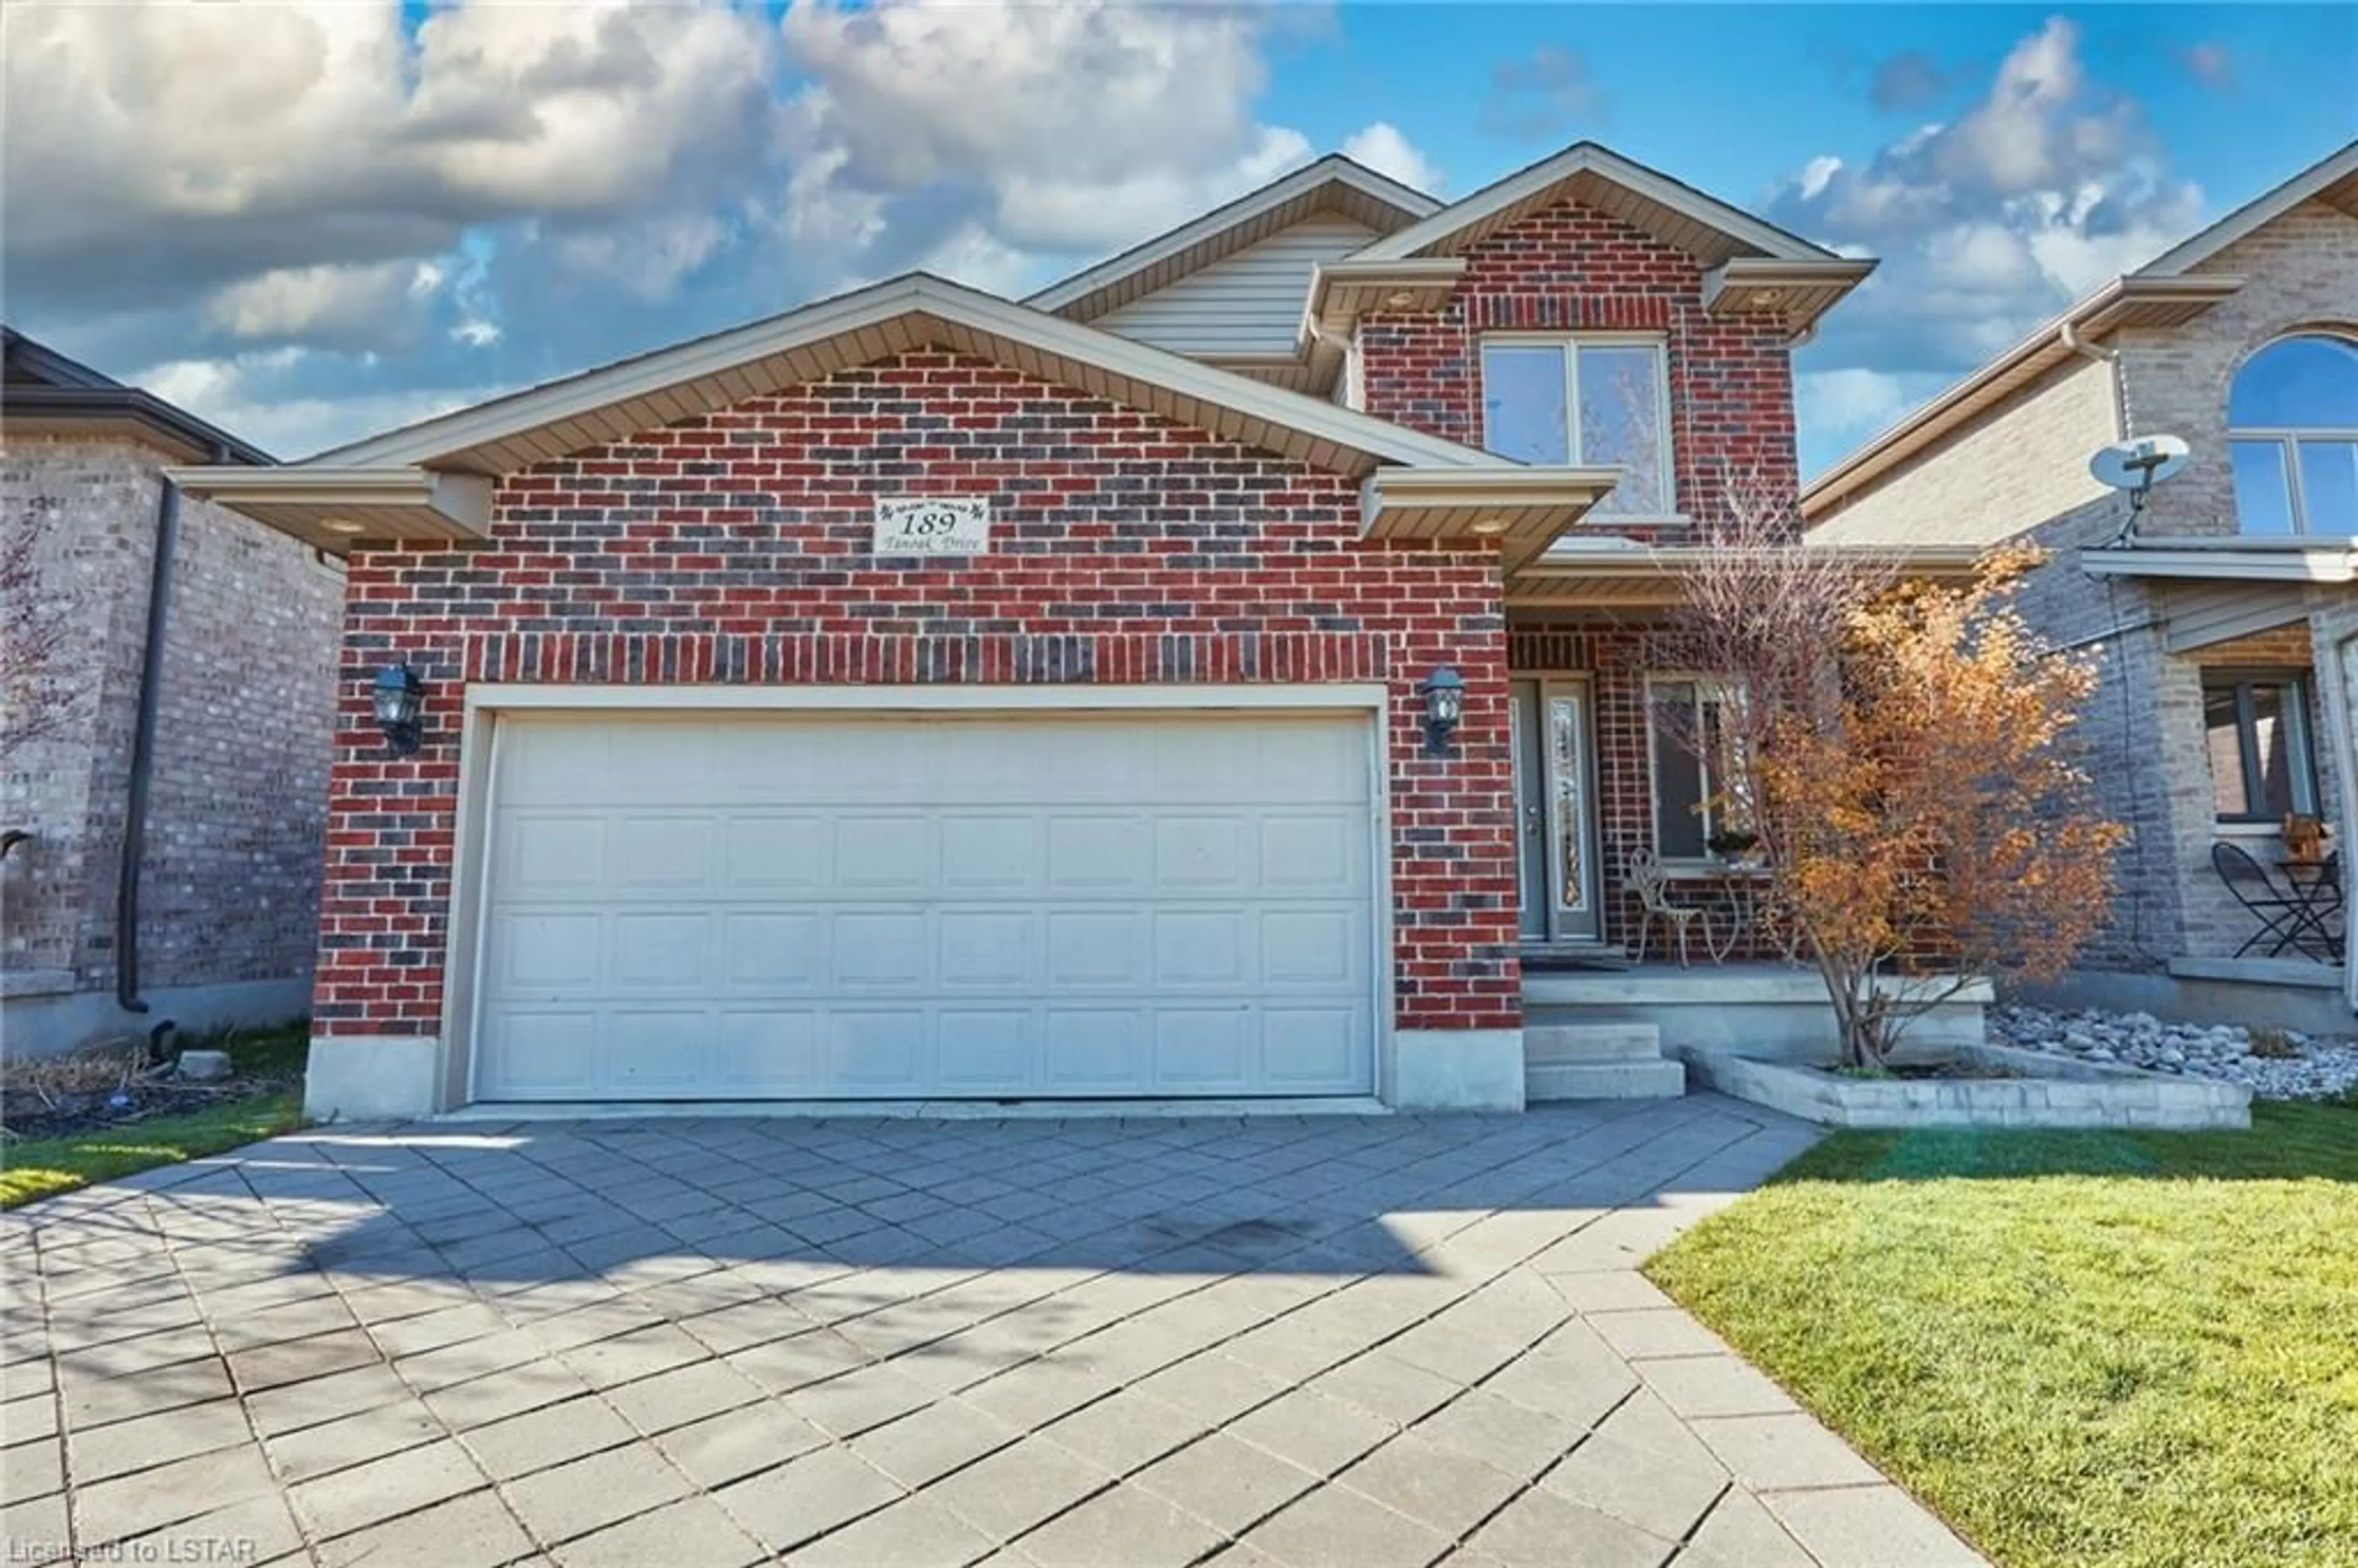 Home with brick exterior material for 189 Tanoak Dr, London Ontario N6G 5N7